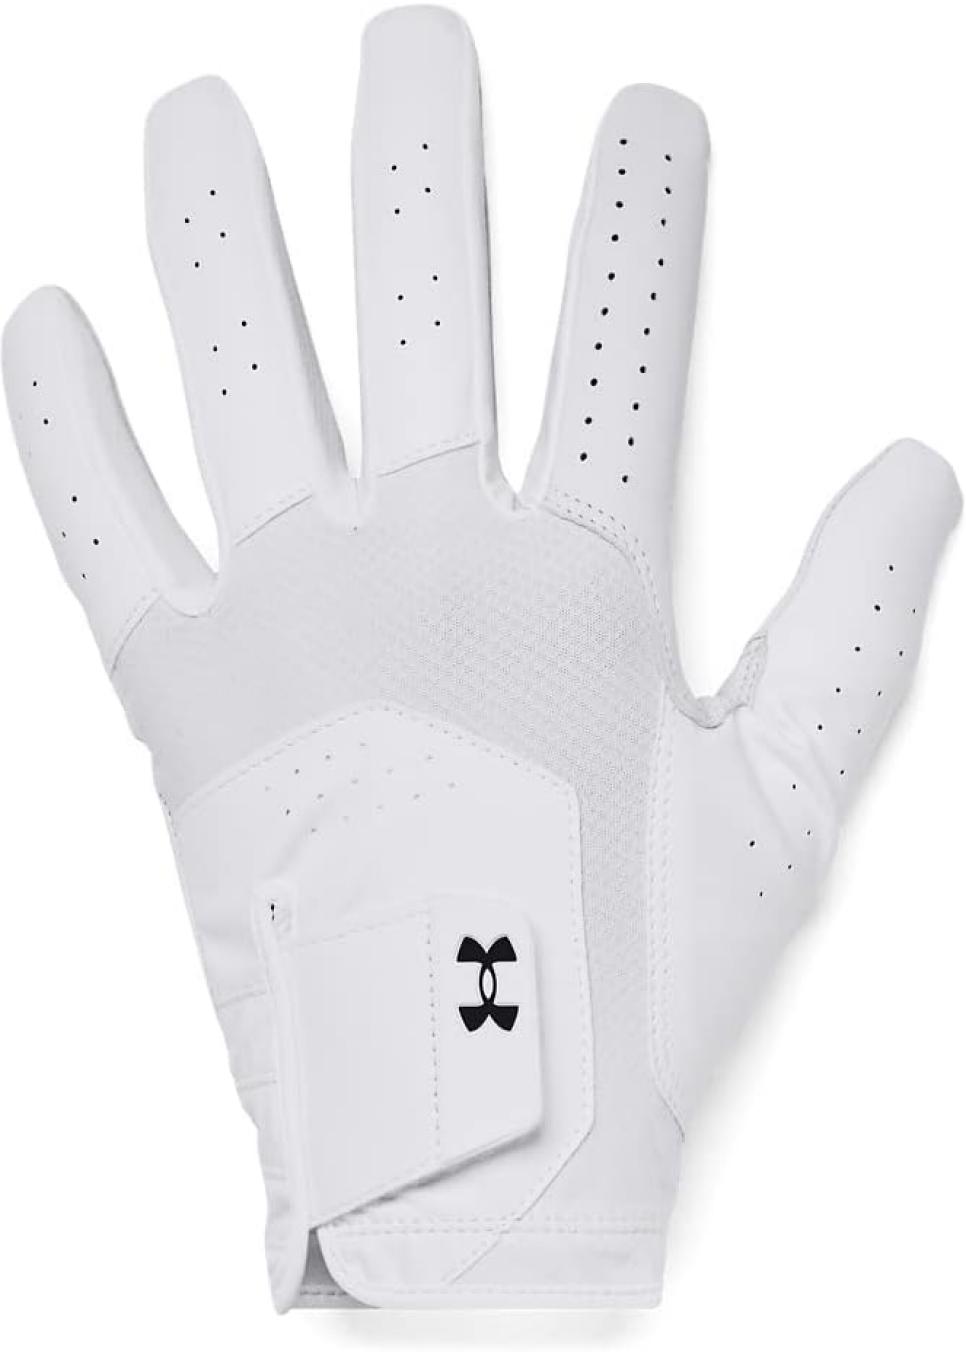 Under Armour Iso-chill Golf Glove